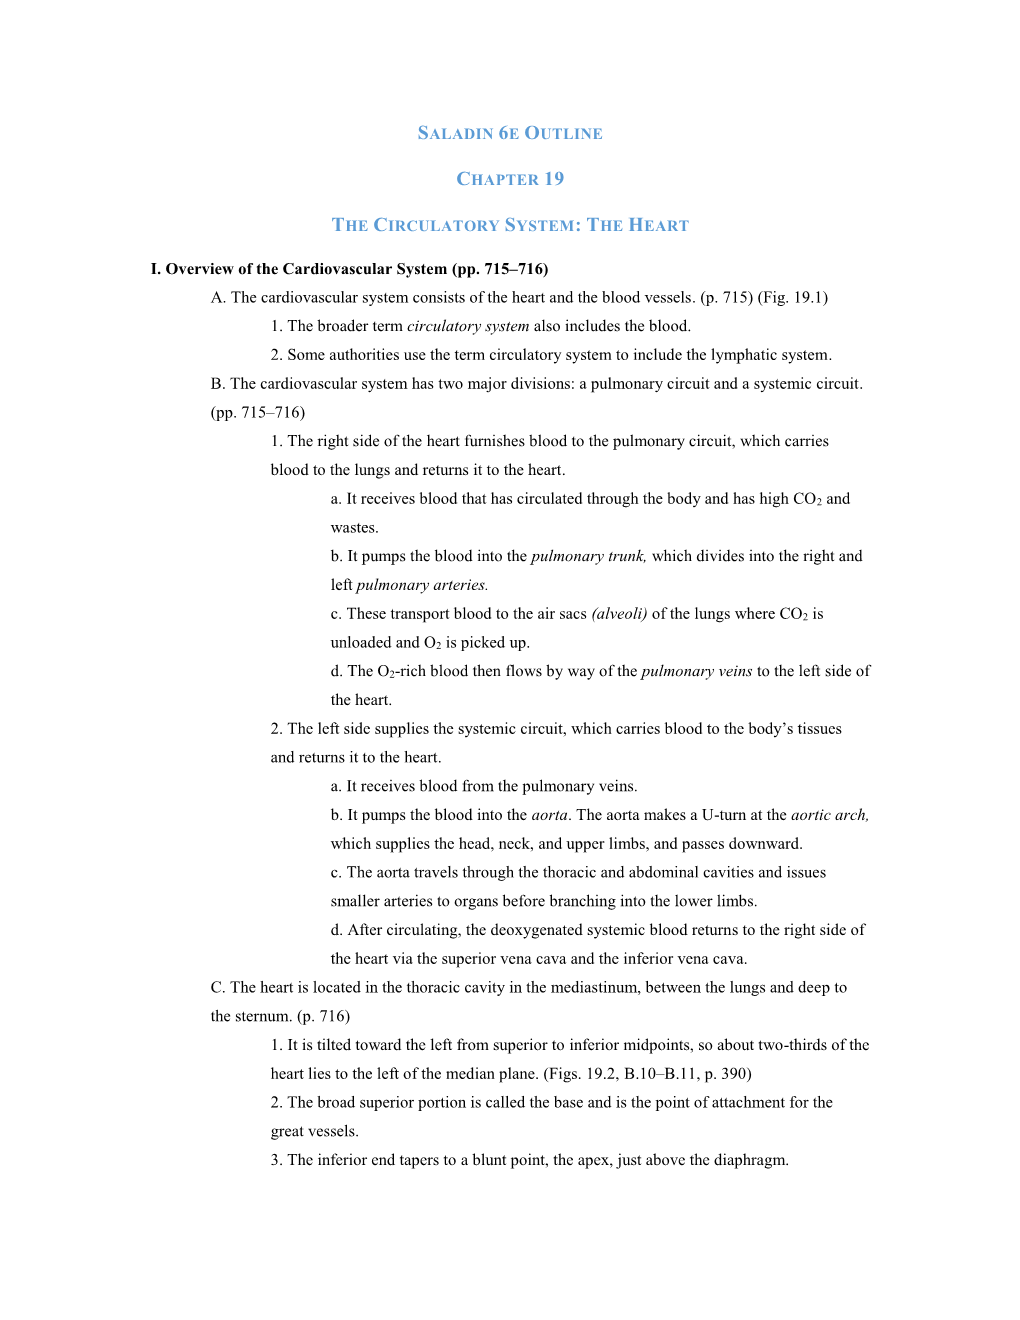 Saladin 6E Outline Chapter 19 The